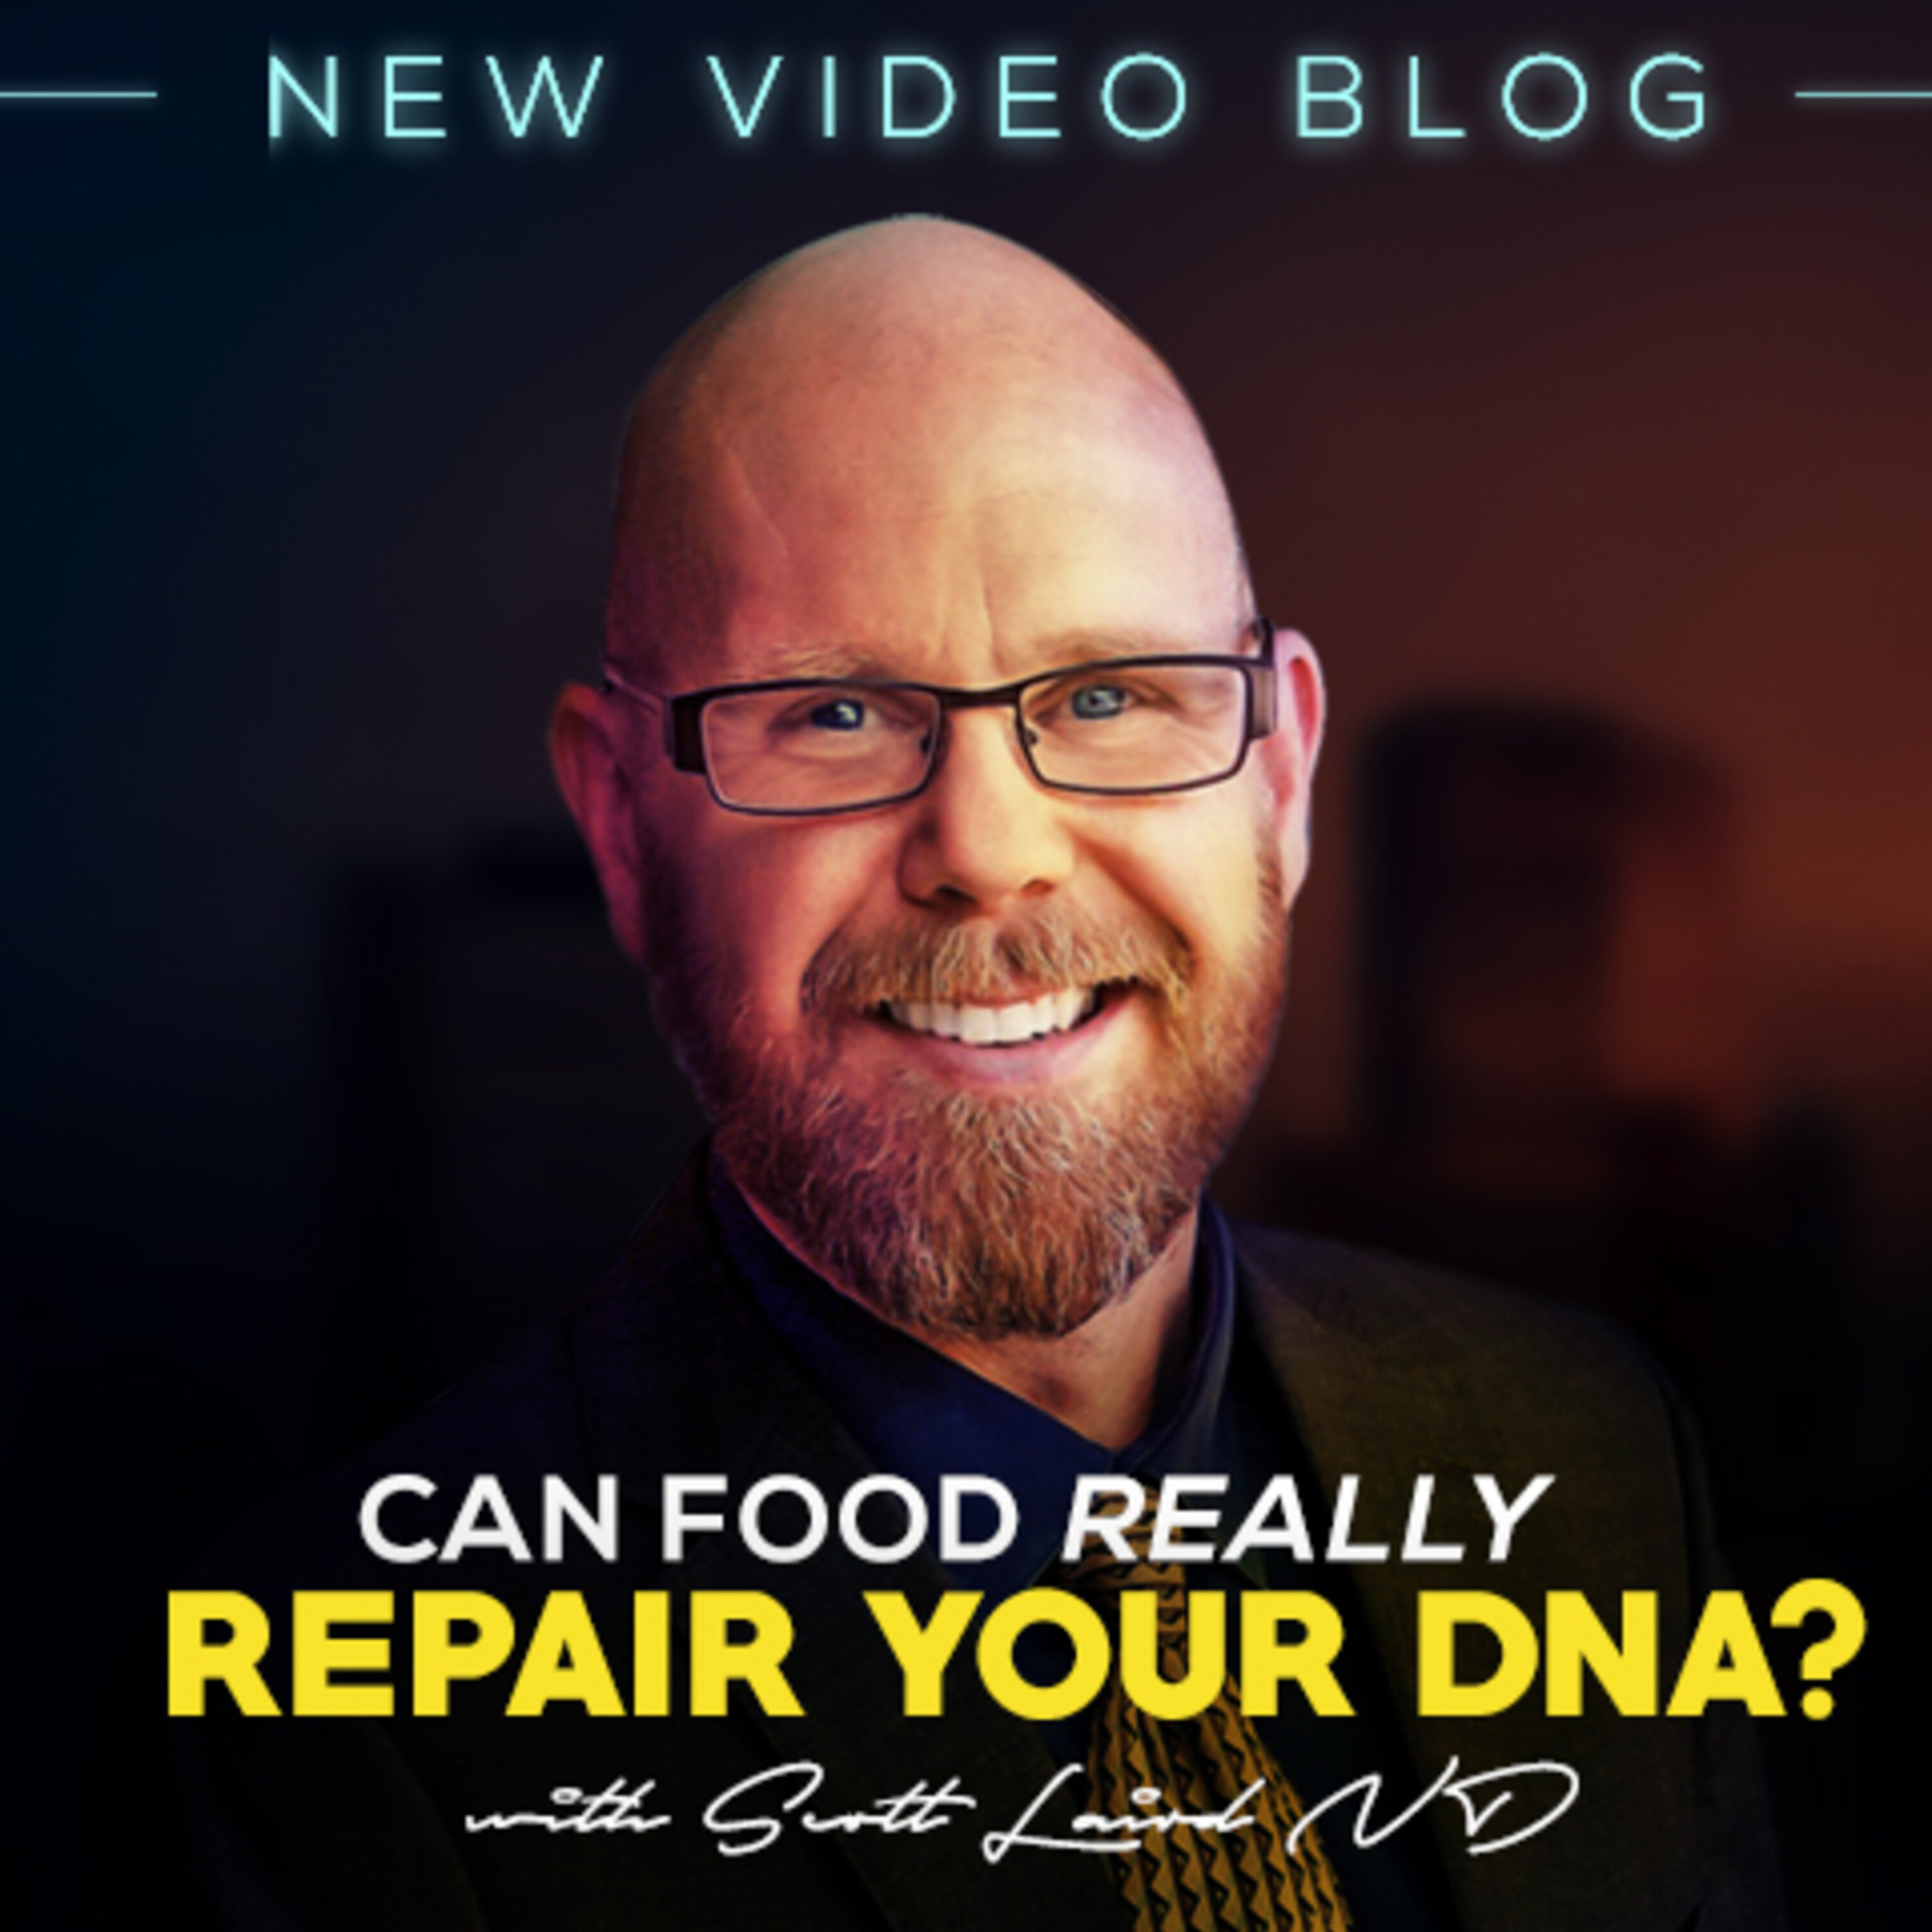 Scott Laird - Can Food Really Repair Your DNA?